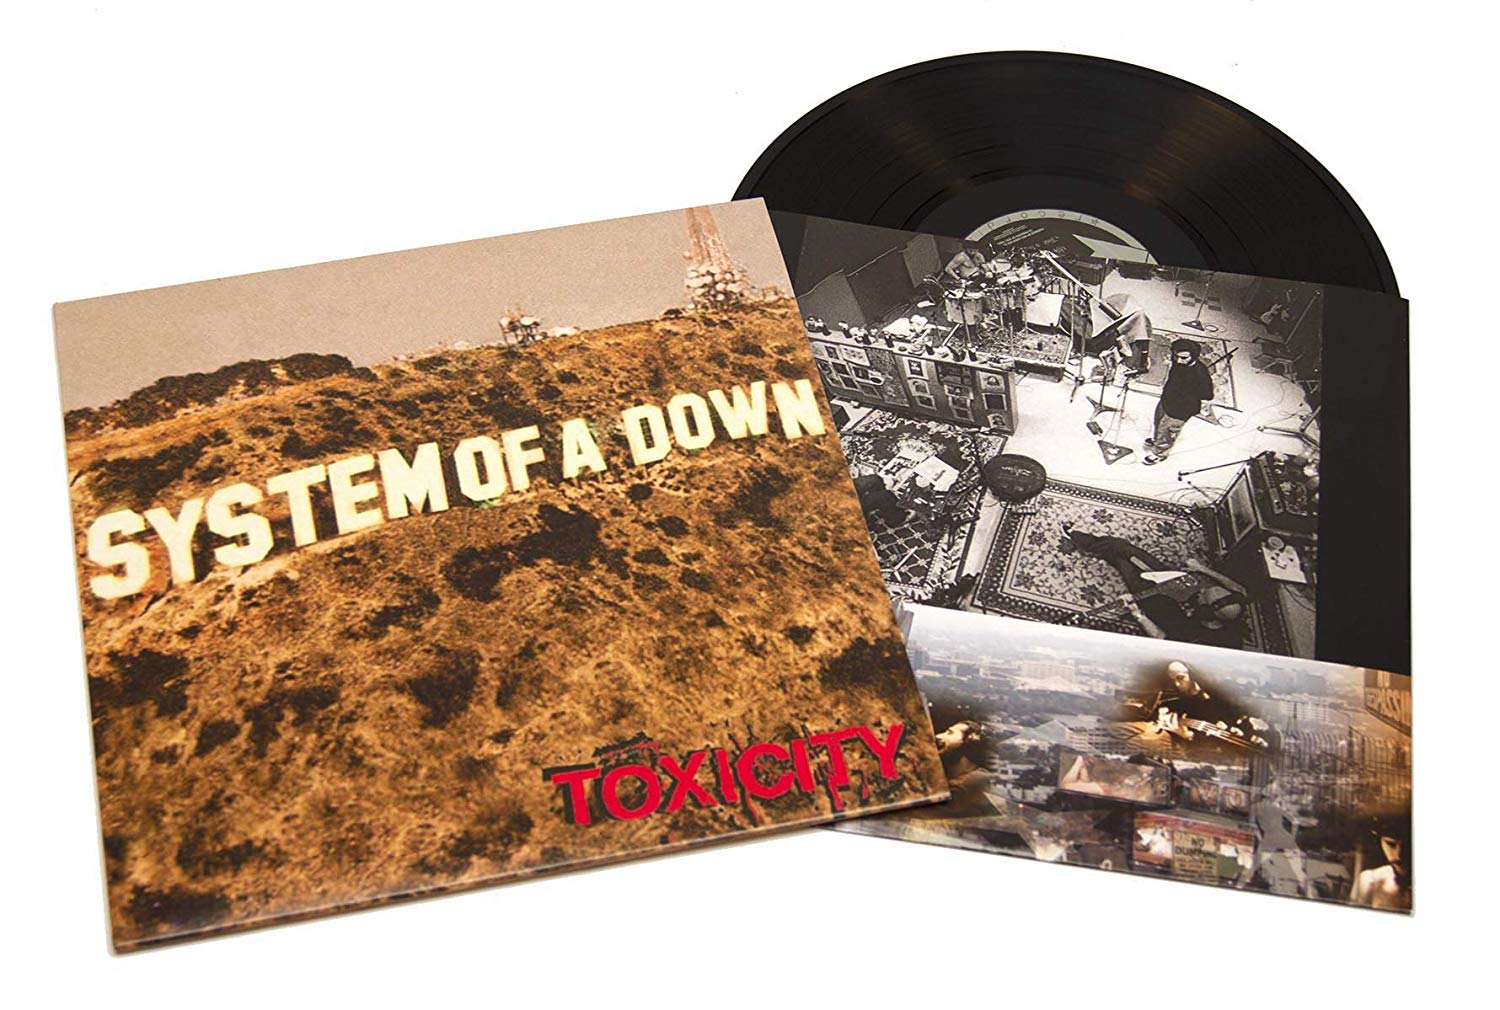 System Of A Down "Toxicity" Vinyl